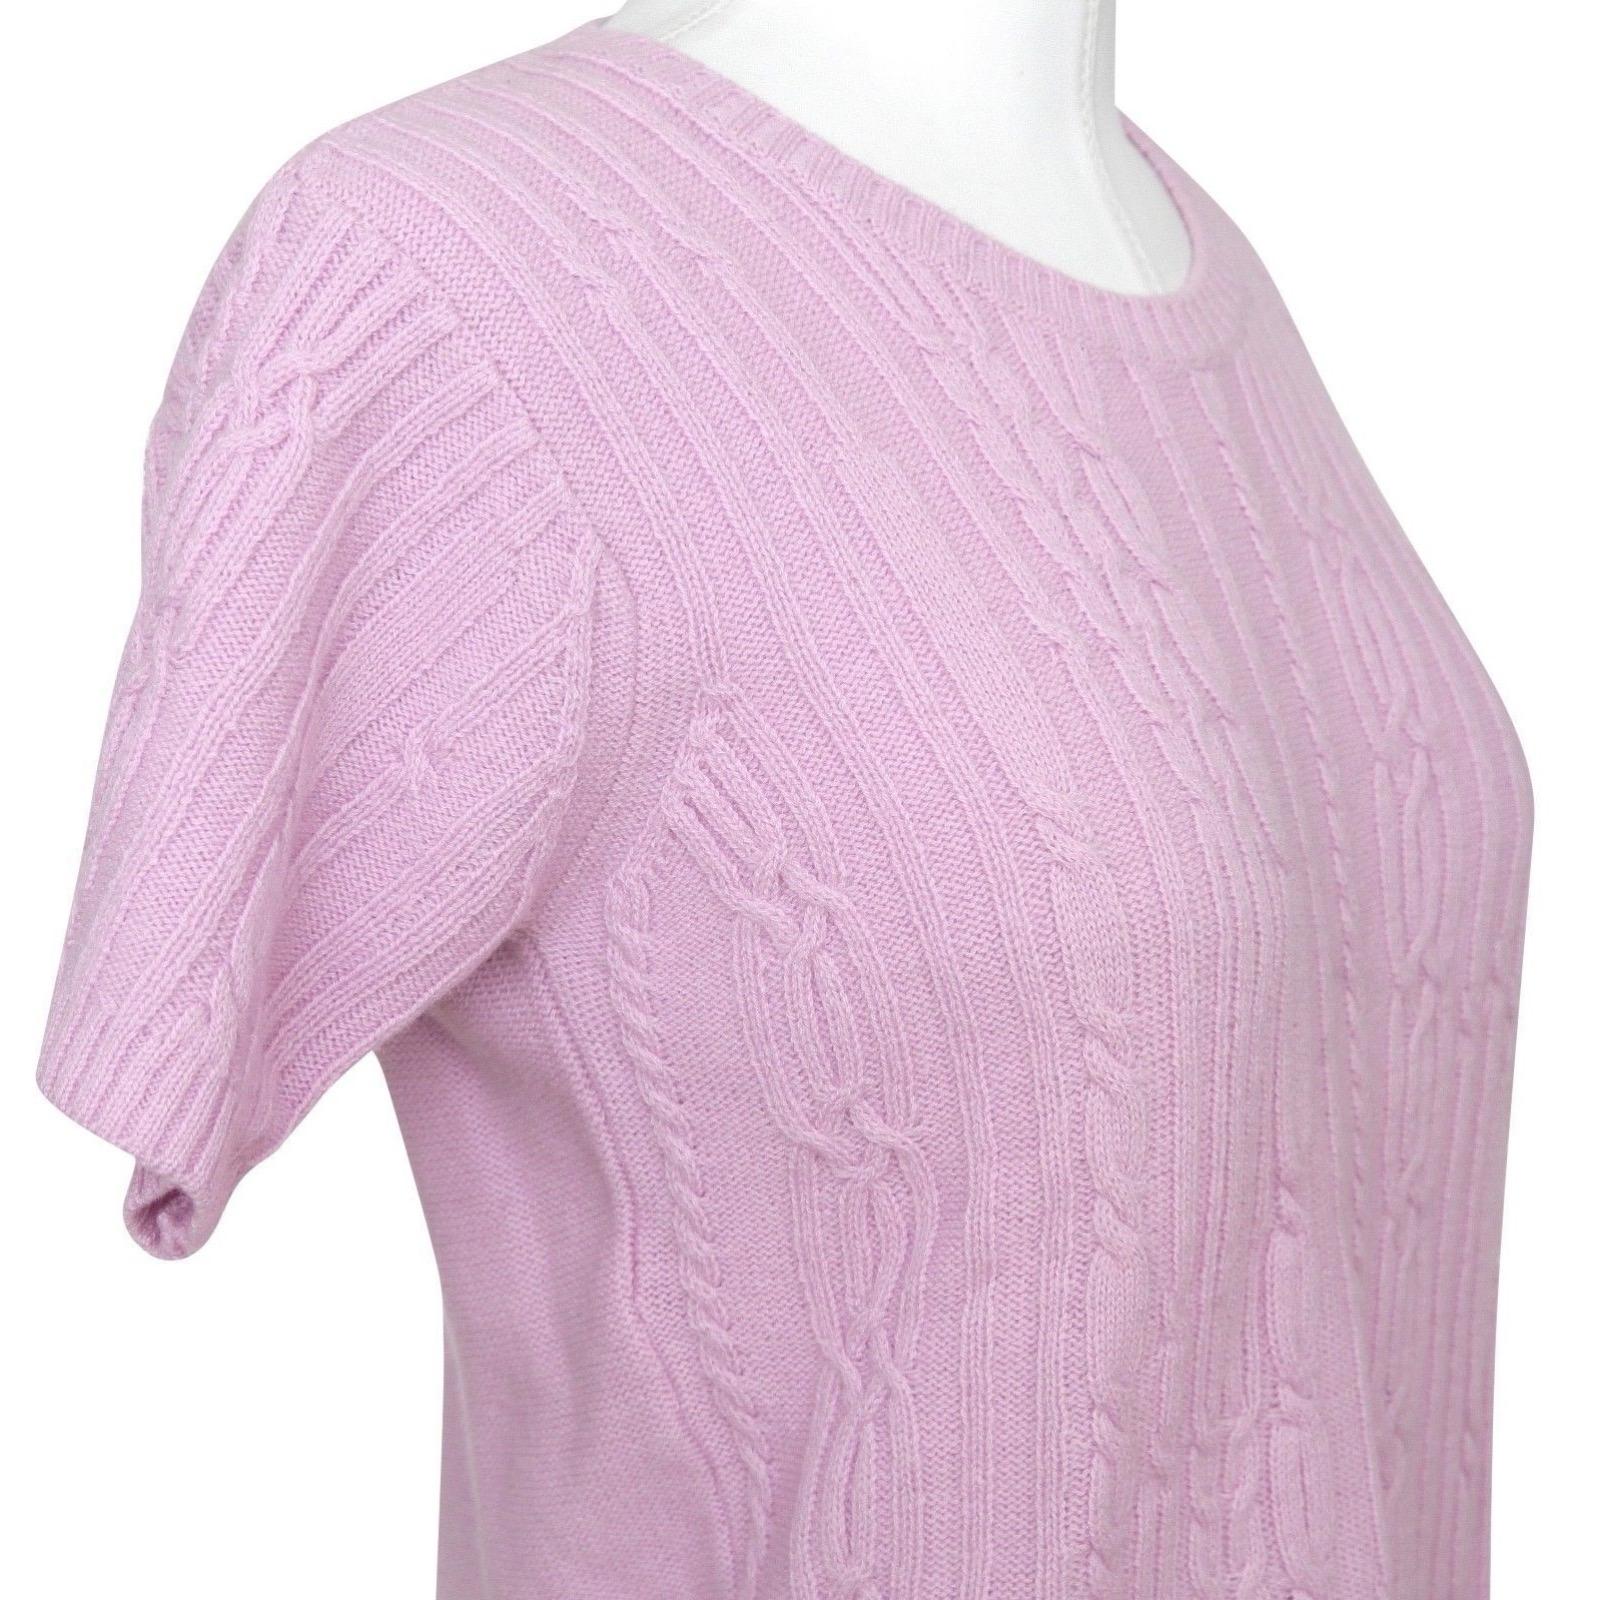 CHLOE Sweater Knit Short Sleeve Top Pink Crew Neck Wool Sz S For Sale 1